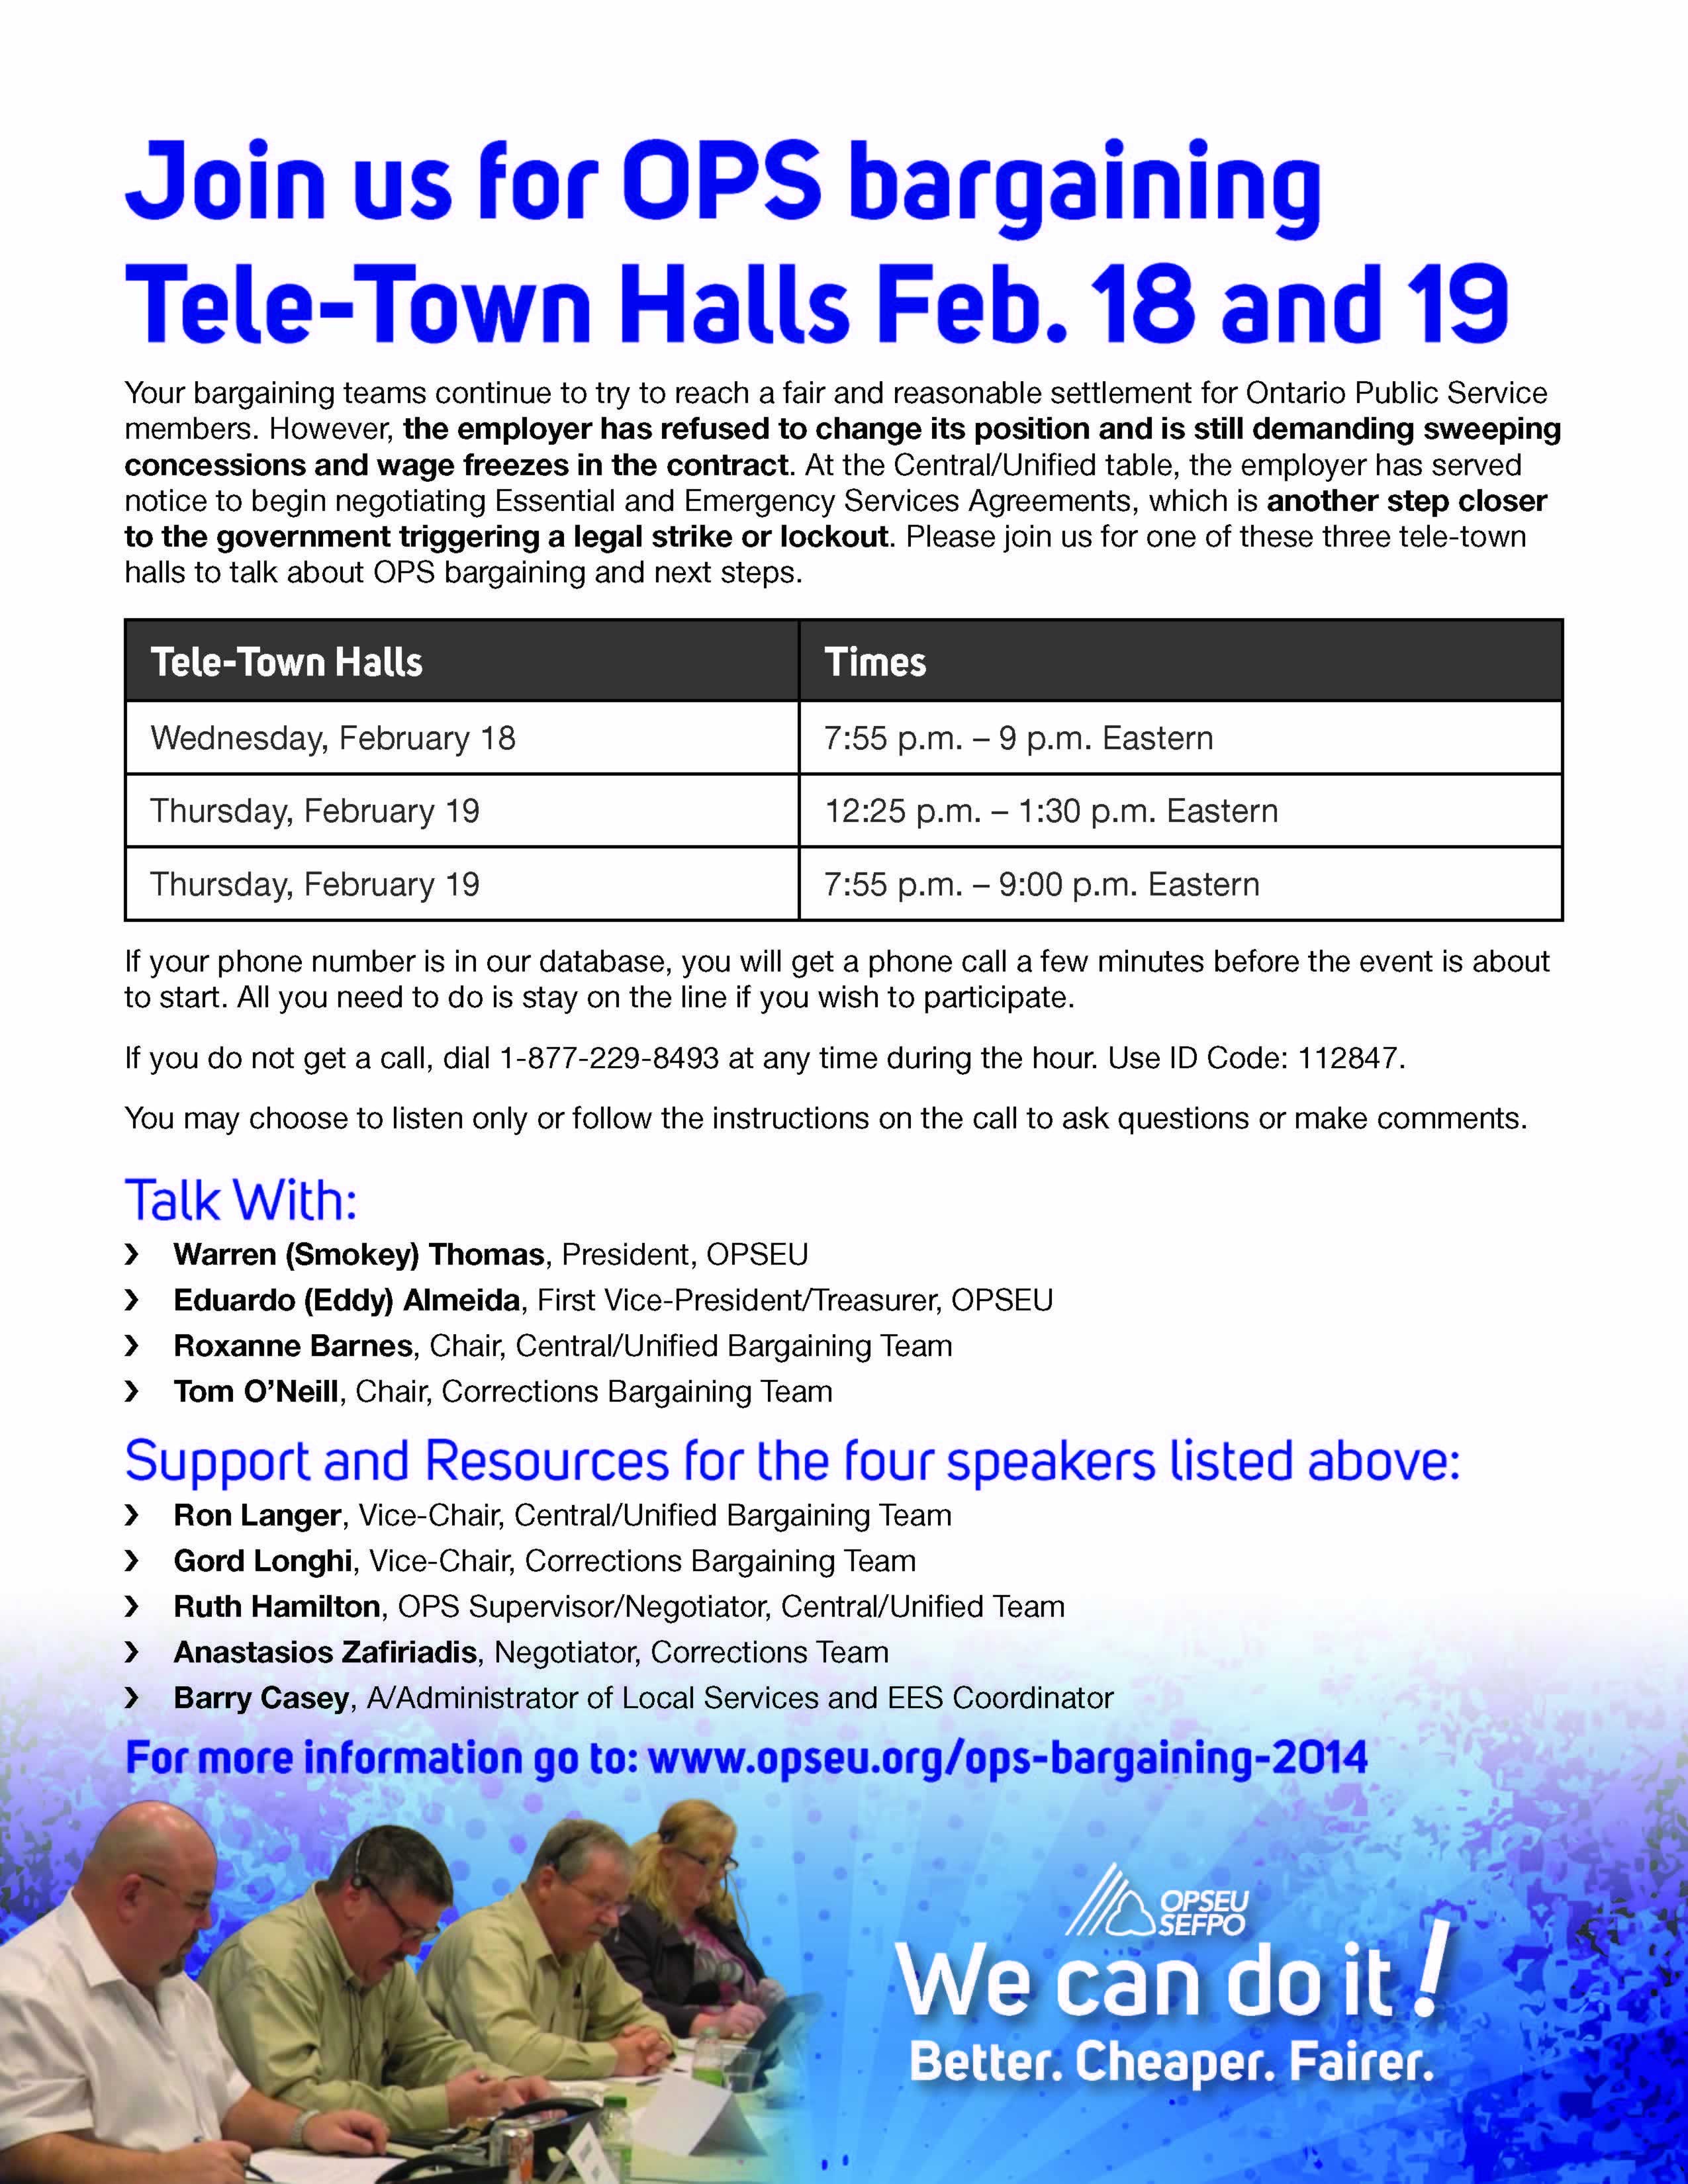 Join us for OPS bargaining tele-town halls feb. 18 & 19.